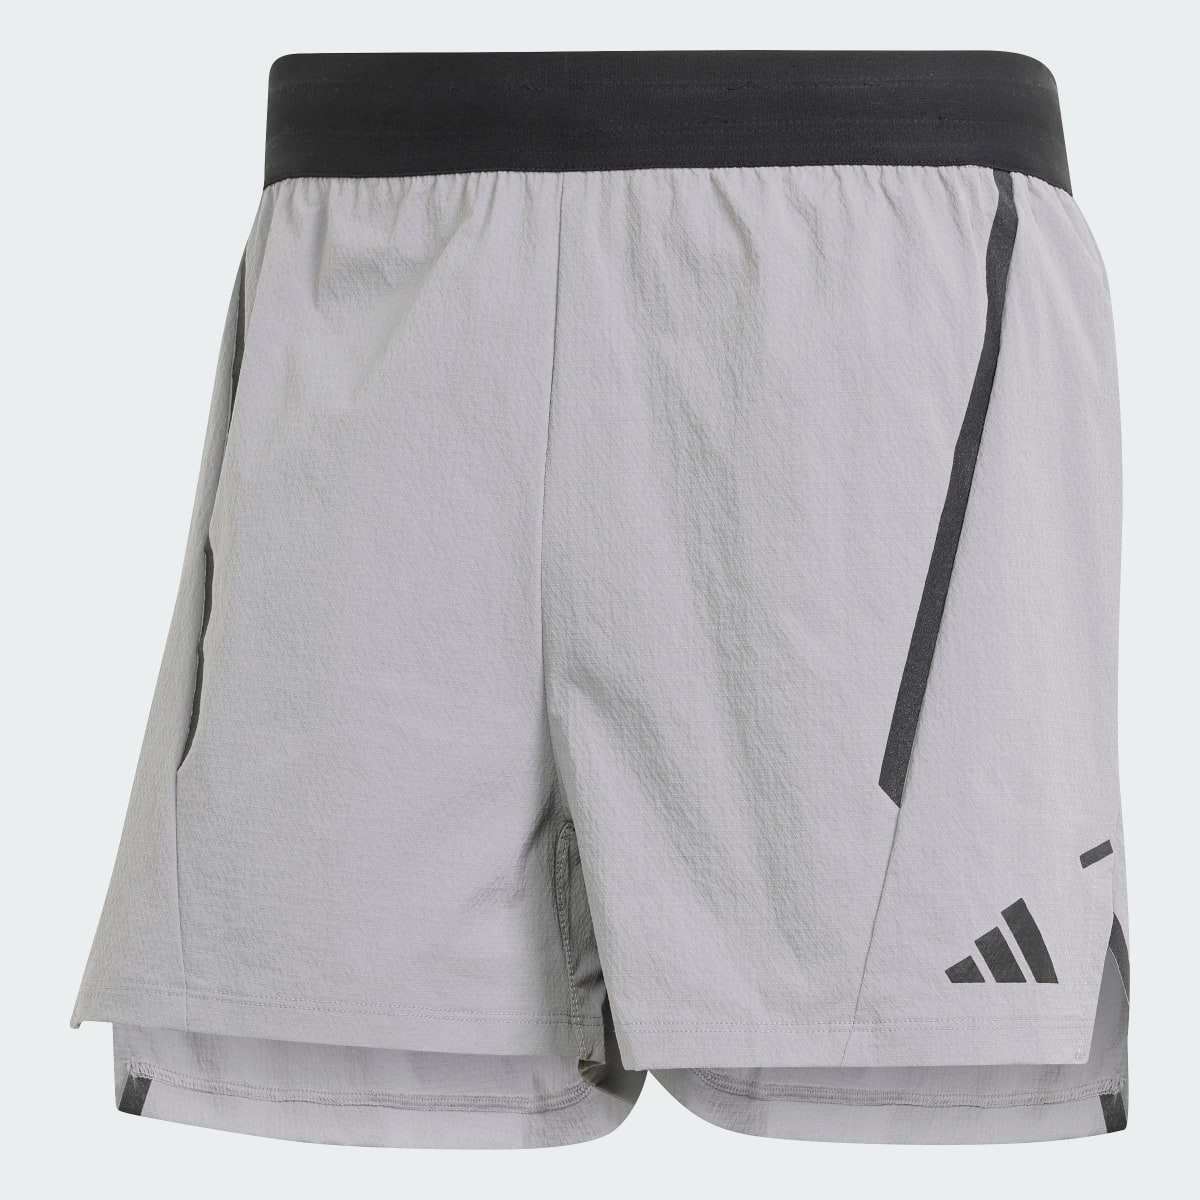 Adidas Designed for Training Pro Series Adistrong Workout Shorts. 5